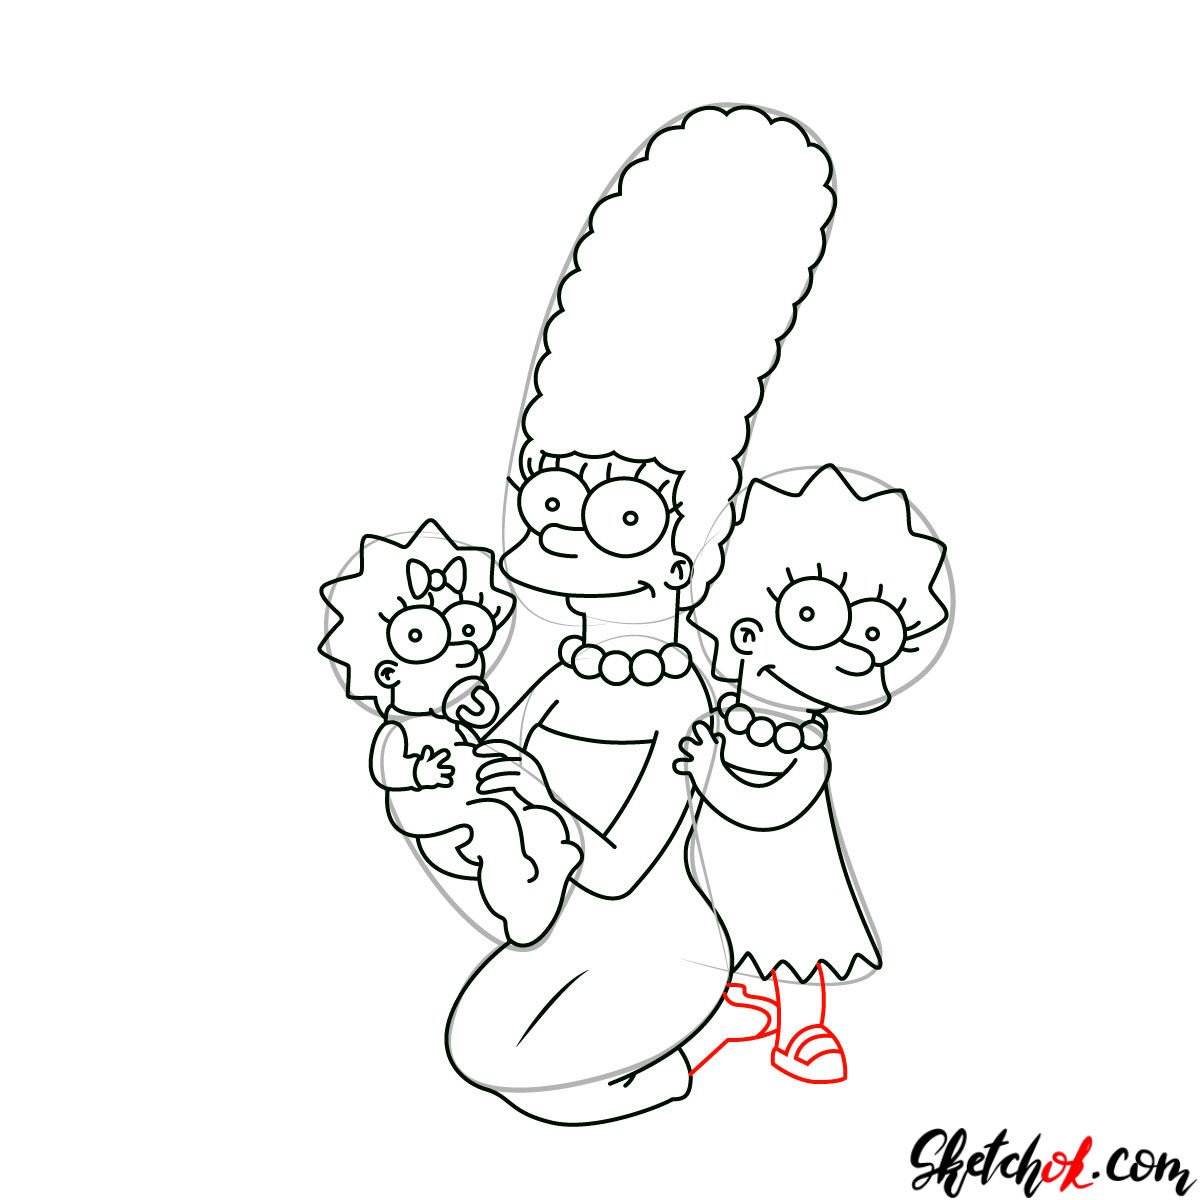 How to draw the Simpsons Family - step 14